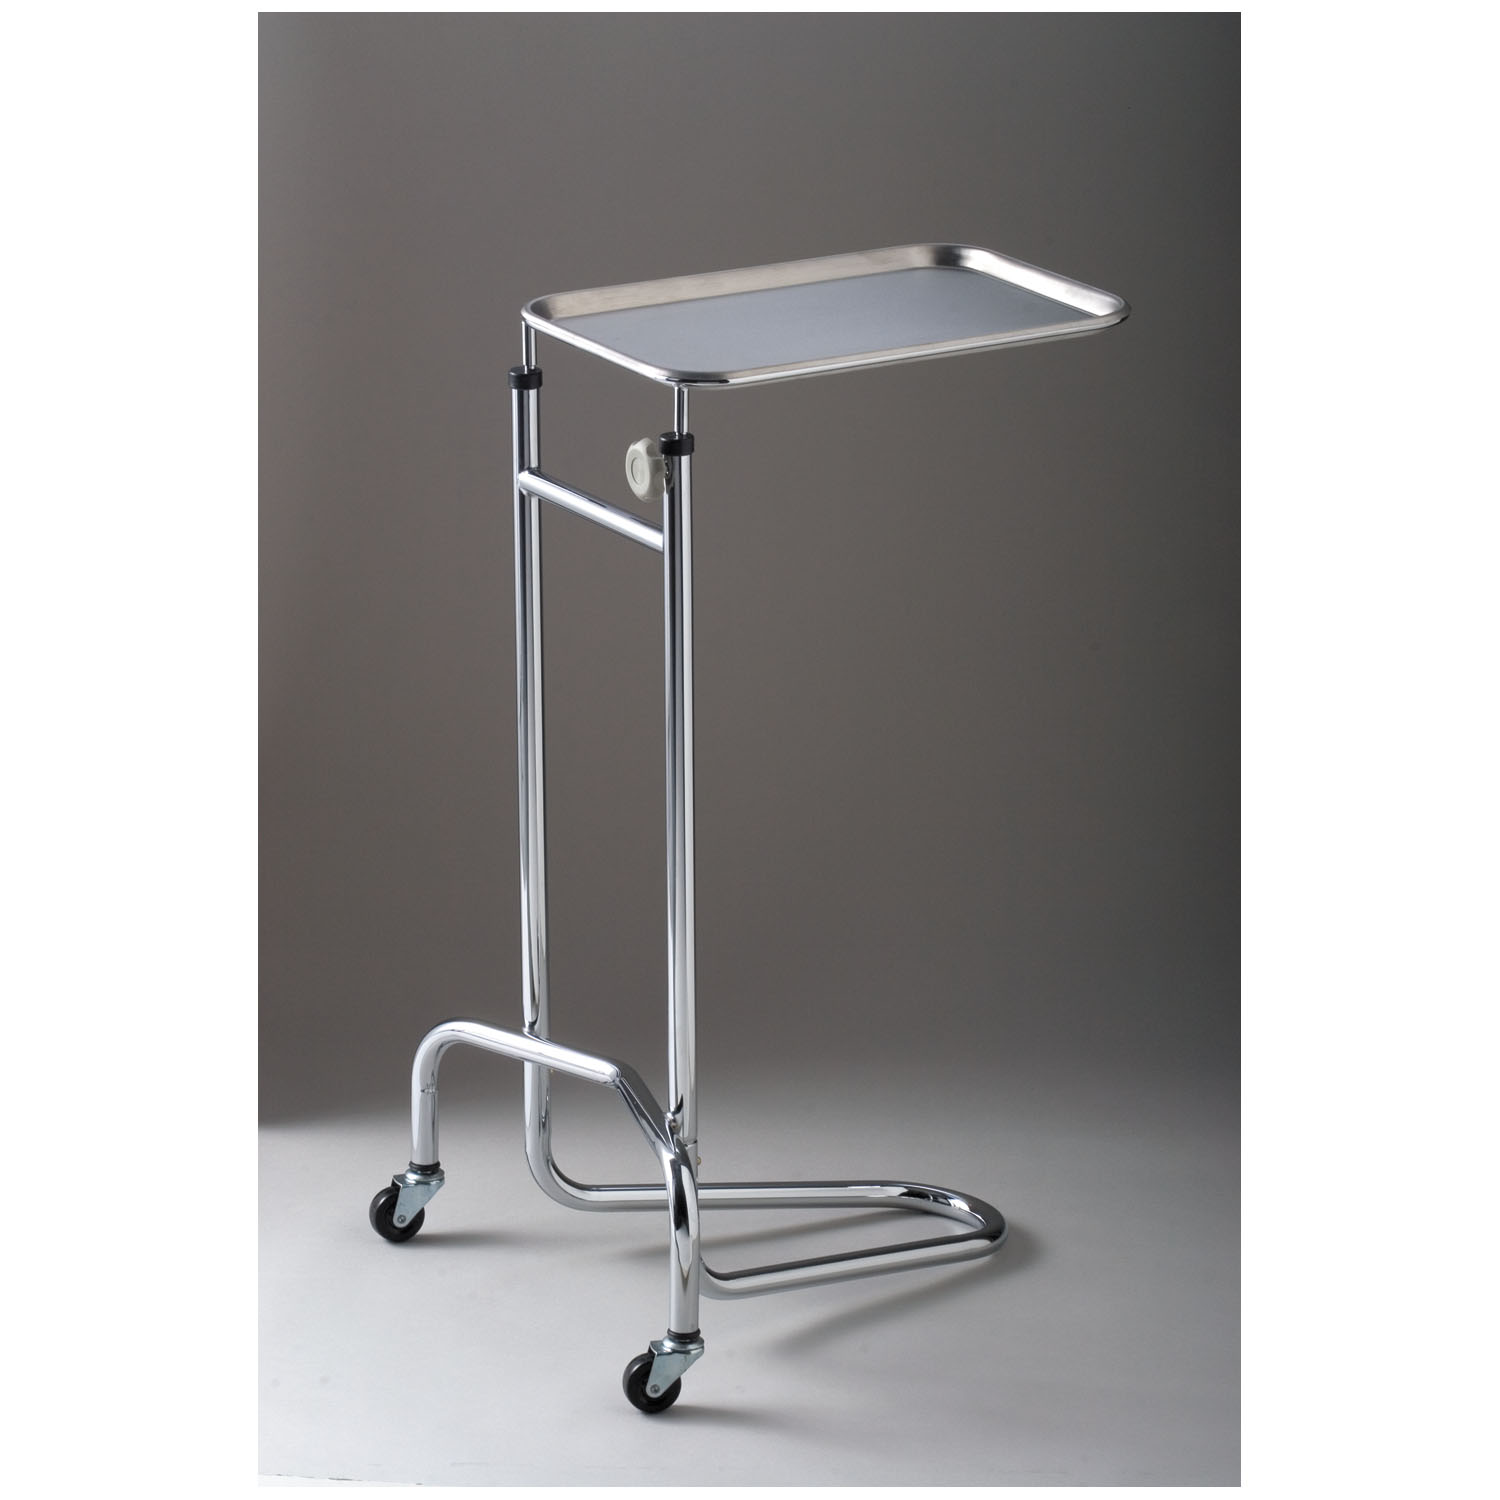 DUKAL TECH-MED MAYO STAND : 4368 EA $130.96 Stocked